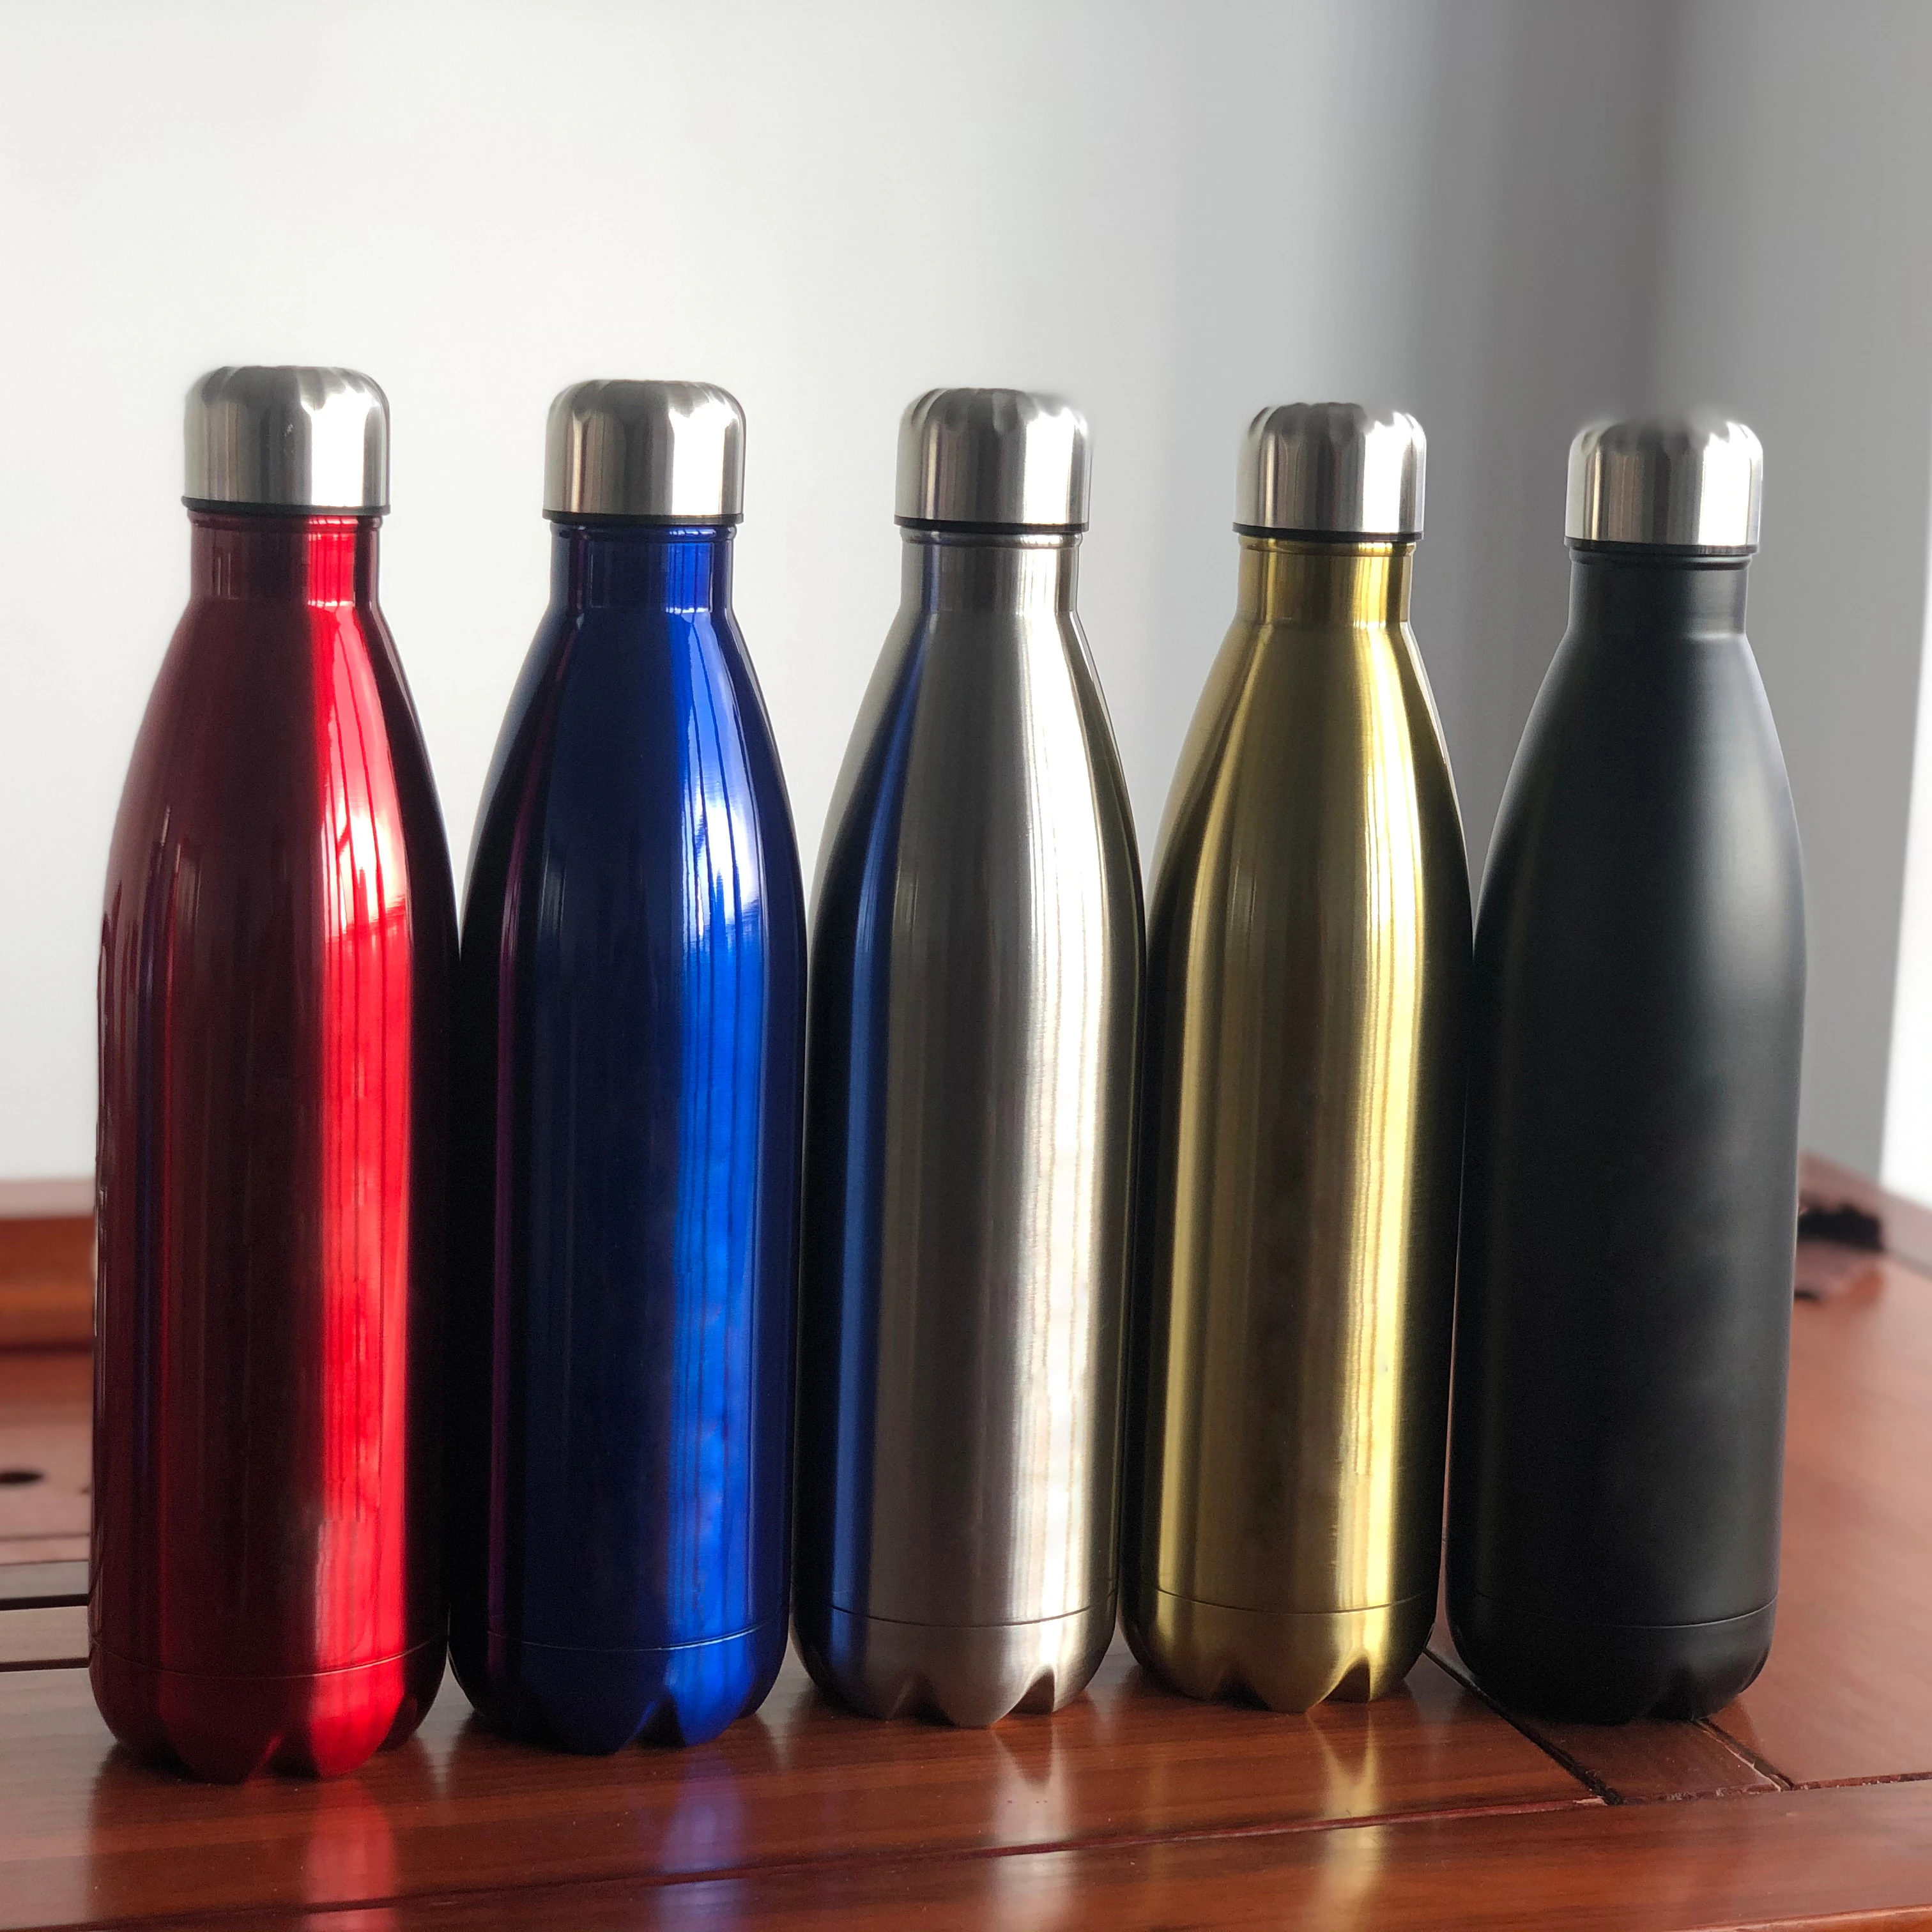 

In Stock Double Wall Stainless Steel 500ml 750ml Thermos Water Bottle Cola Shape Flasks Insulated with Lid Fast Delivery, Red/blue/black/stainless steel/gold